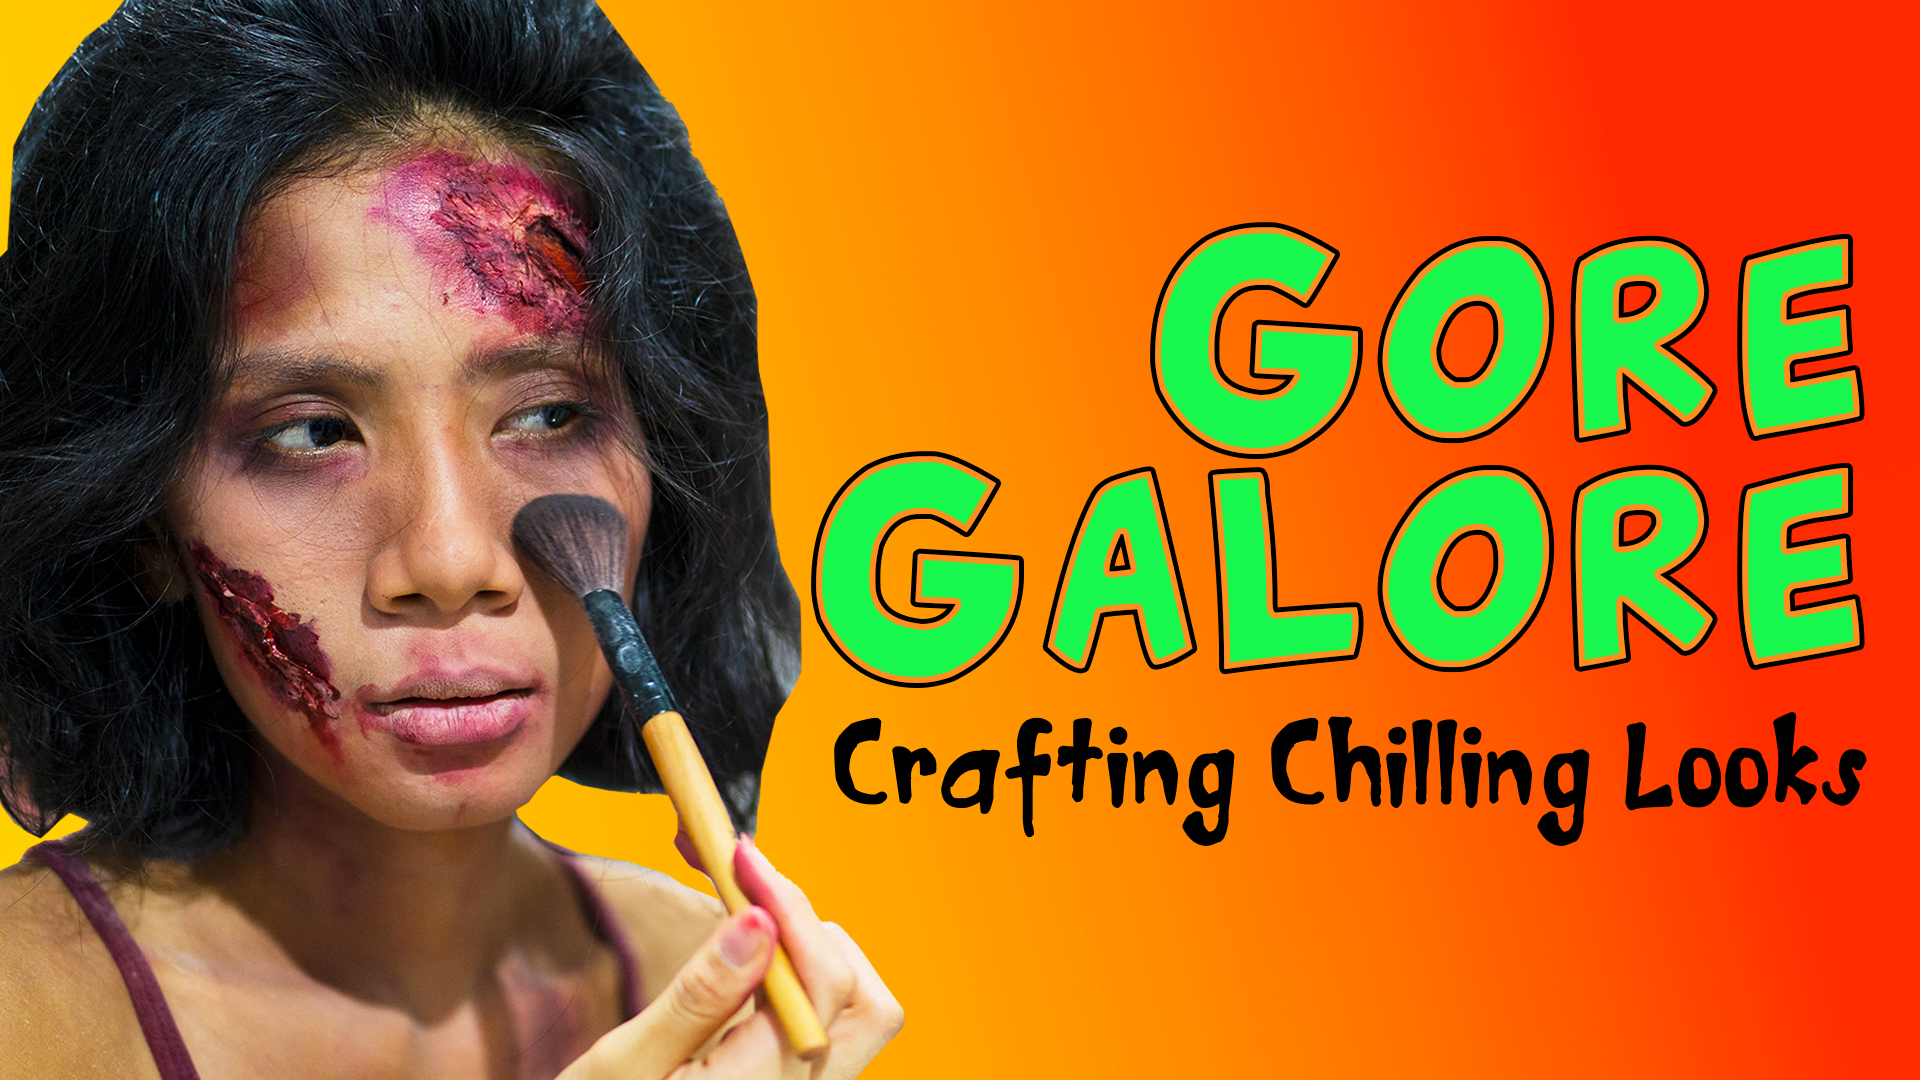 Image reads "Gore Galore Crafting Chilling Looks" against an orange gradient. A woman applying special FX makeup is to the left of the title.